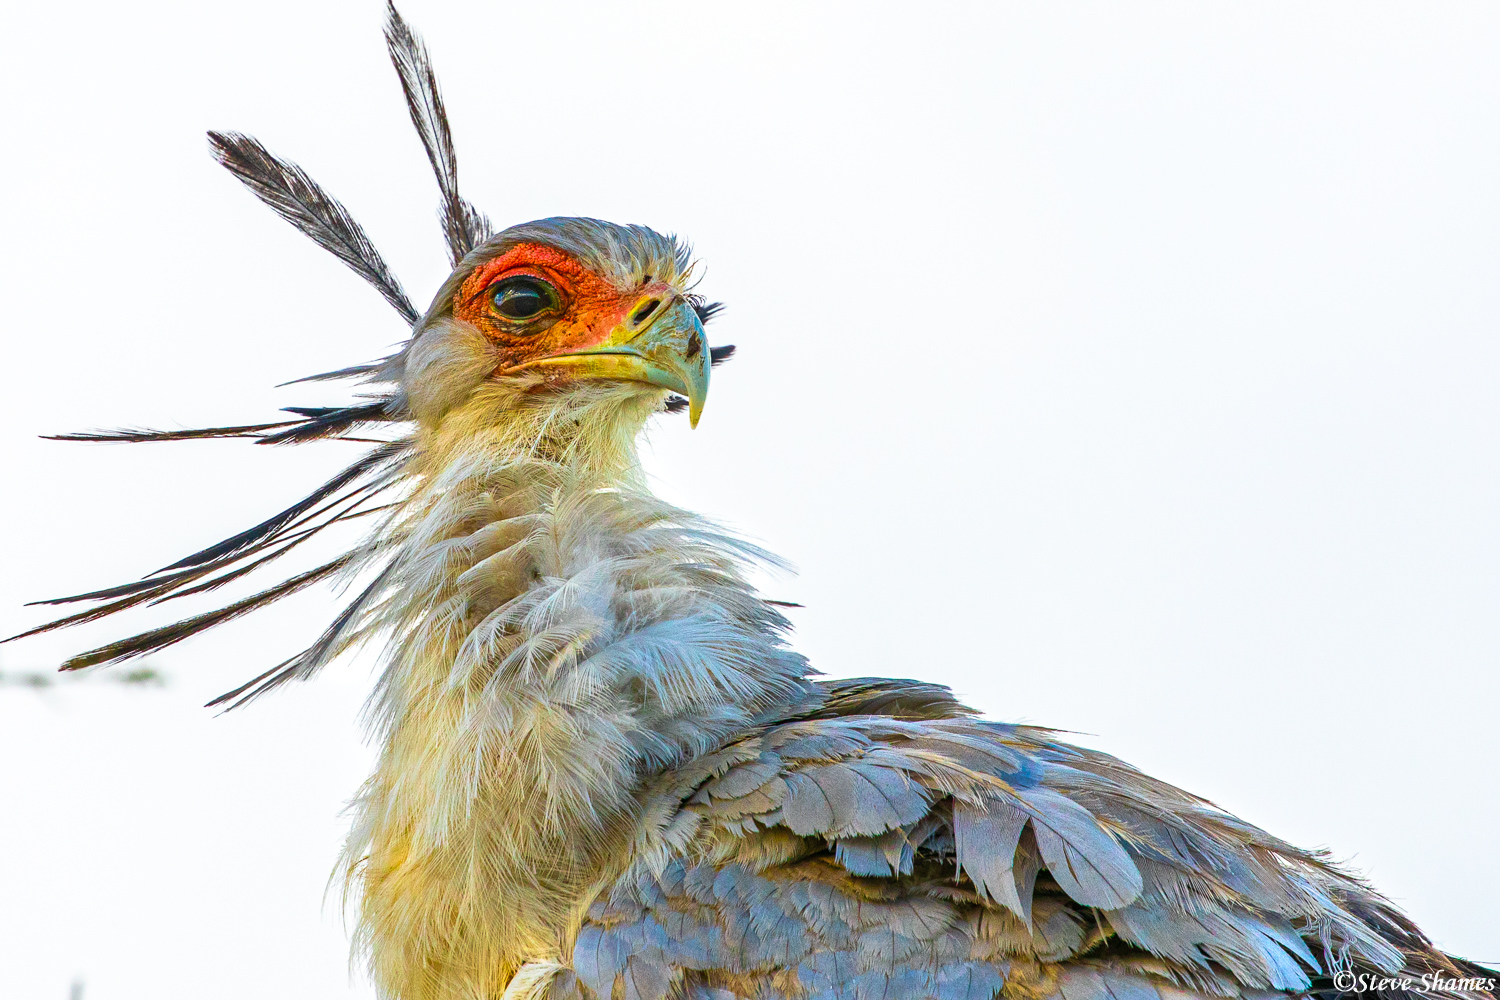 This Secretary bird has its head feathers sticking out. They have quite a red head.